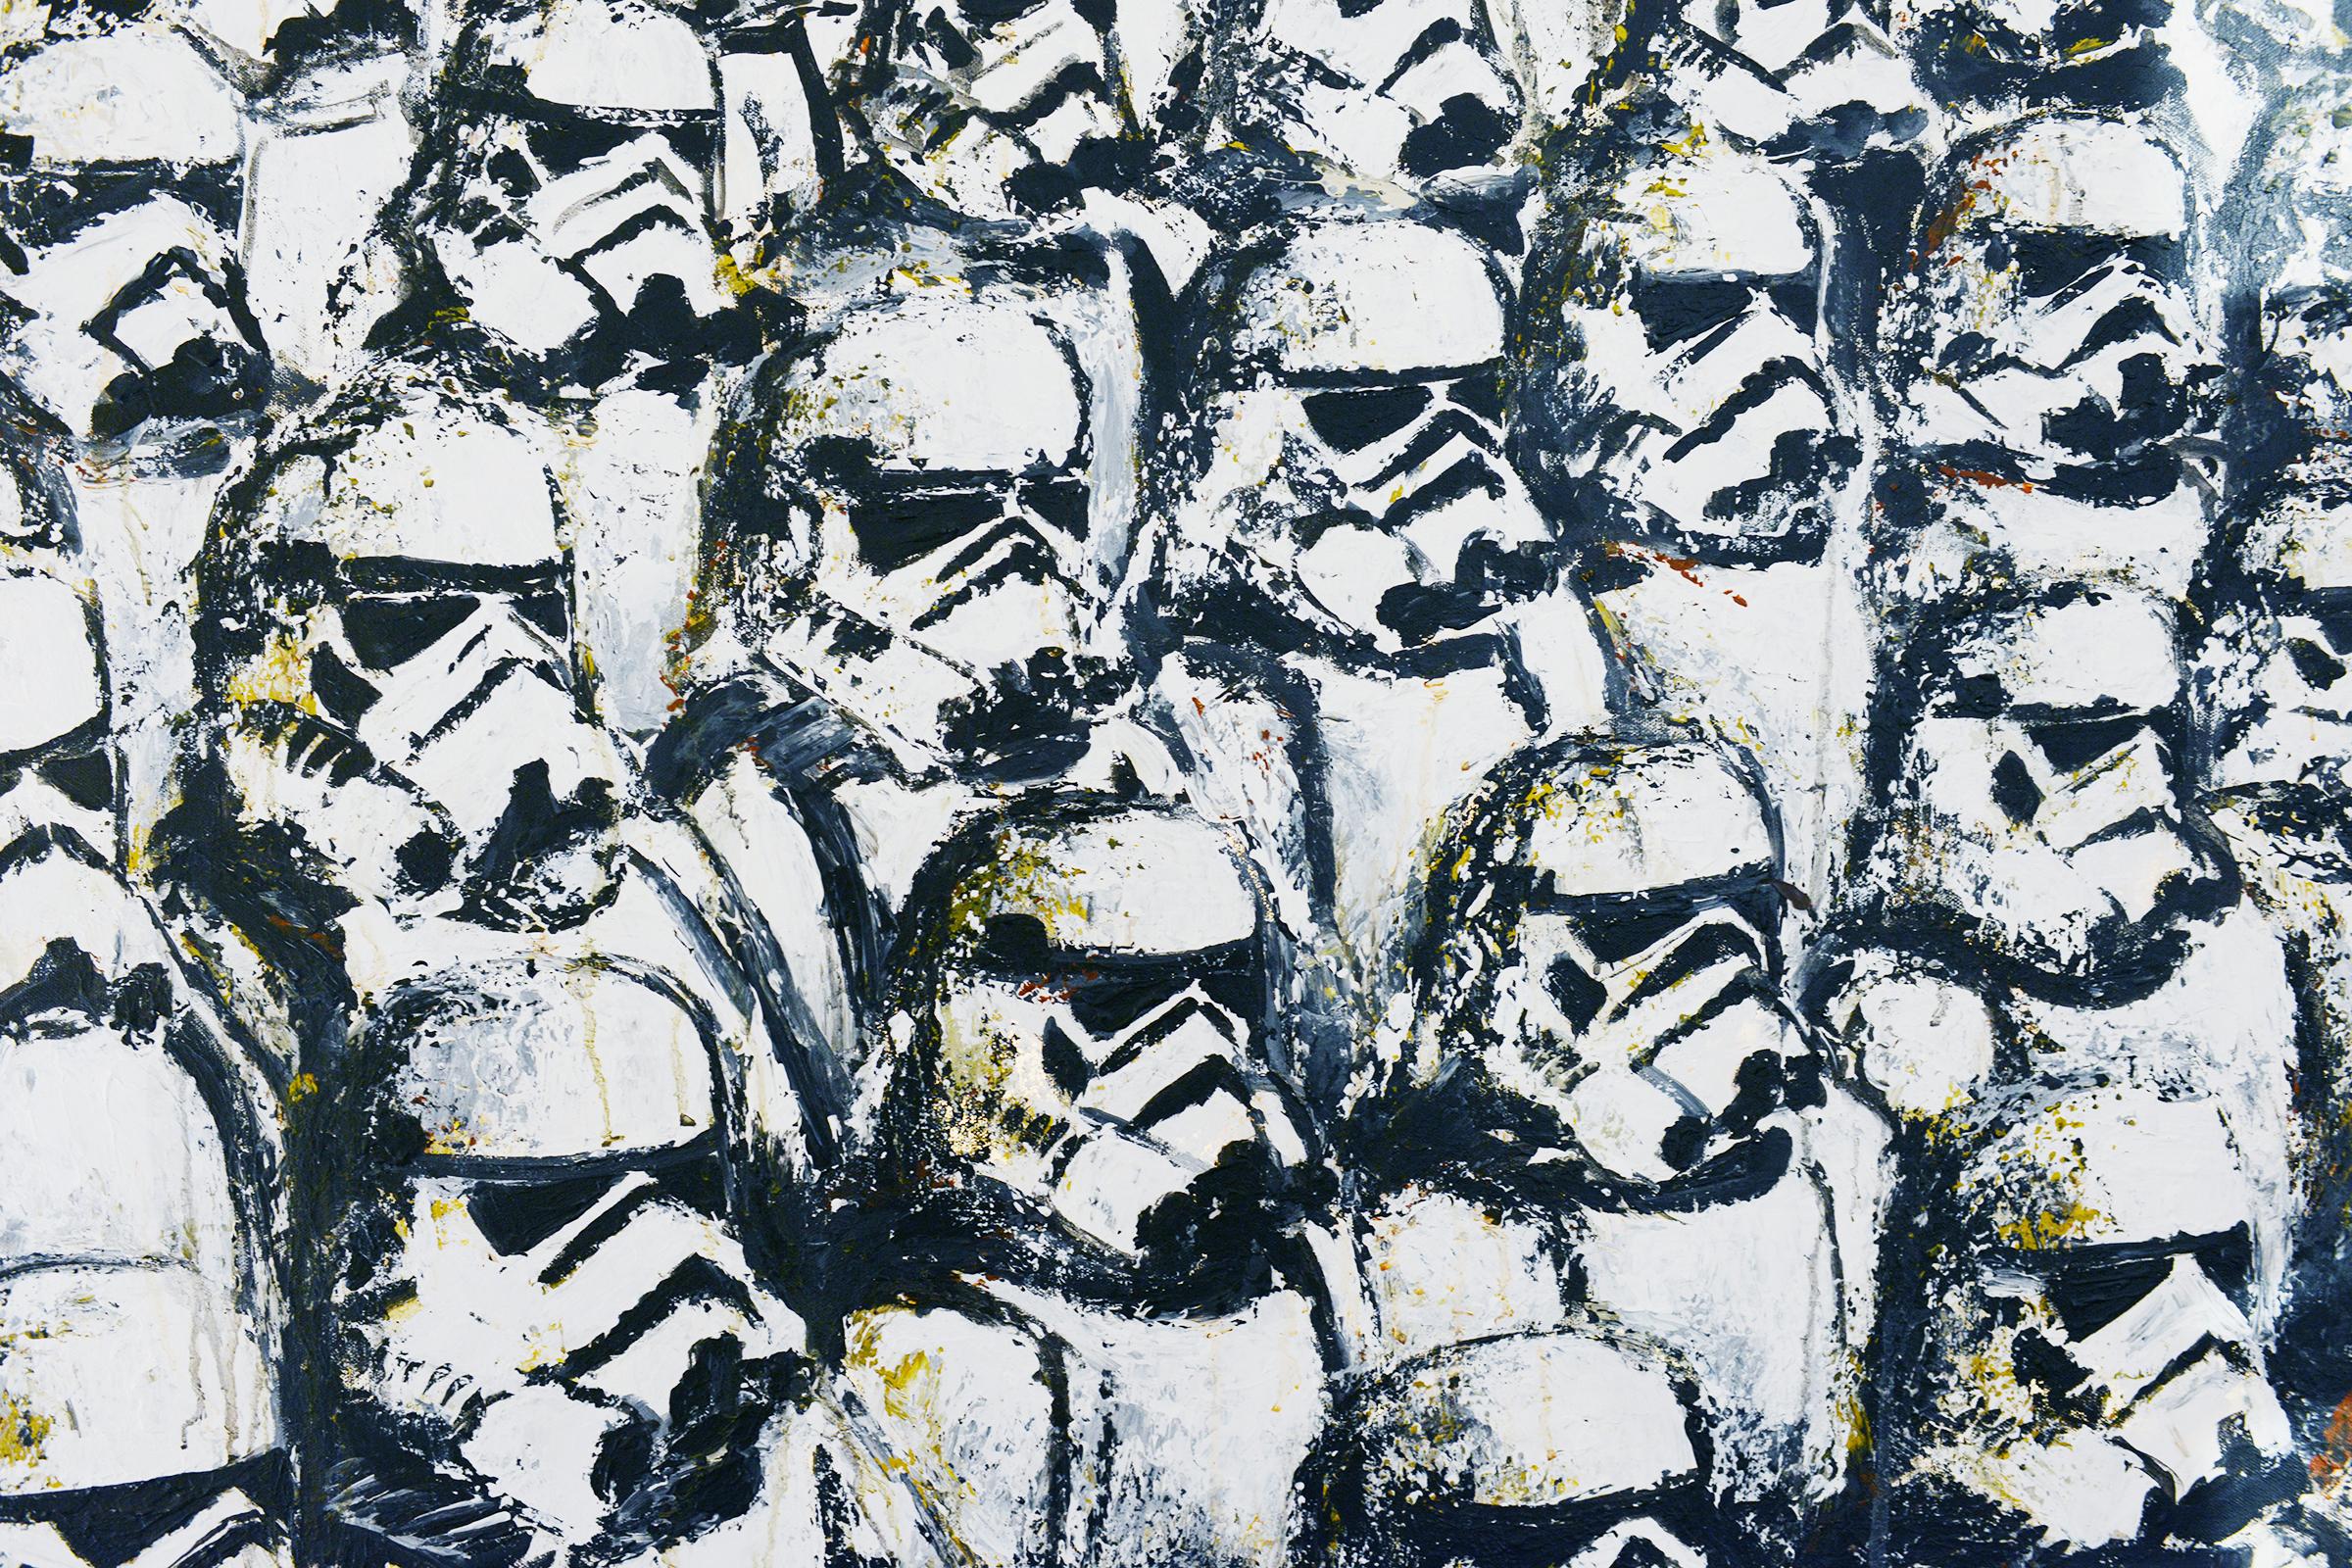 painting stormtroopers